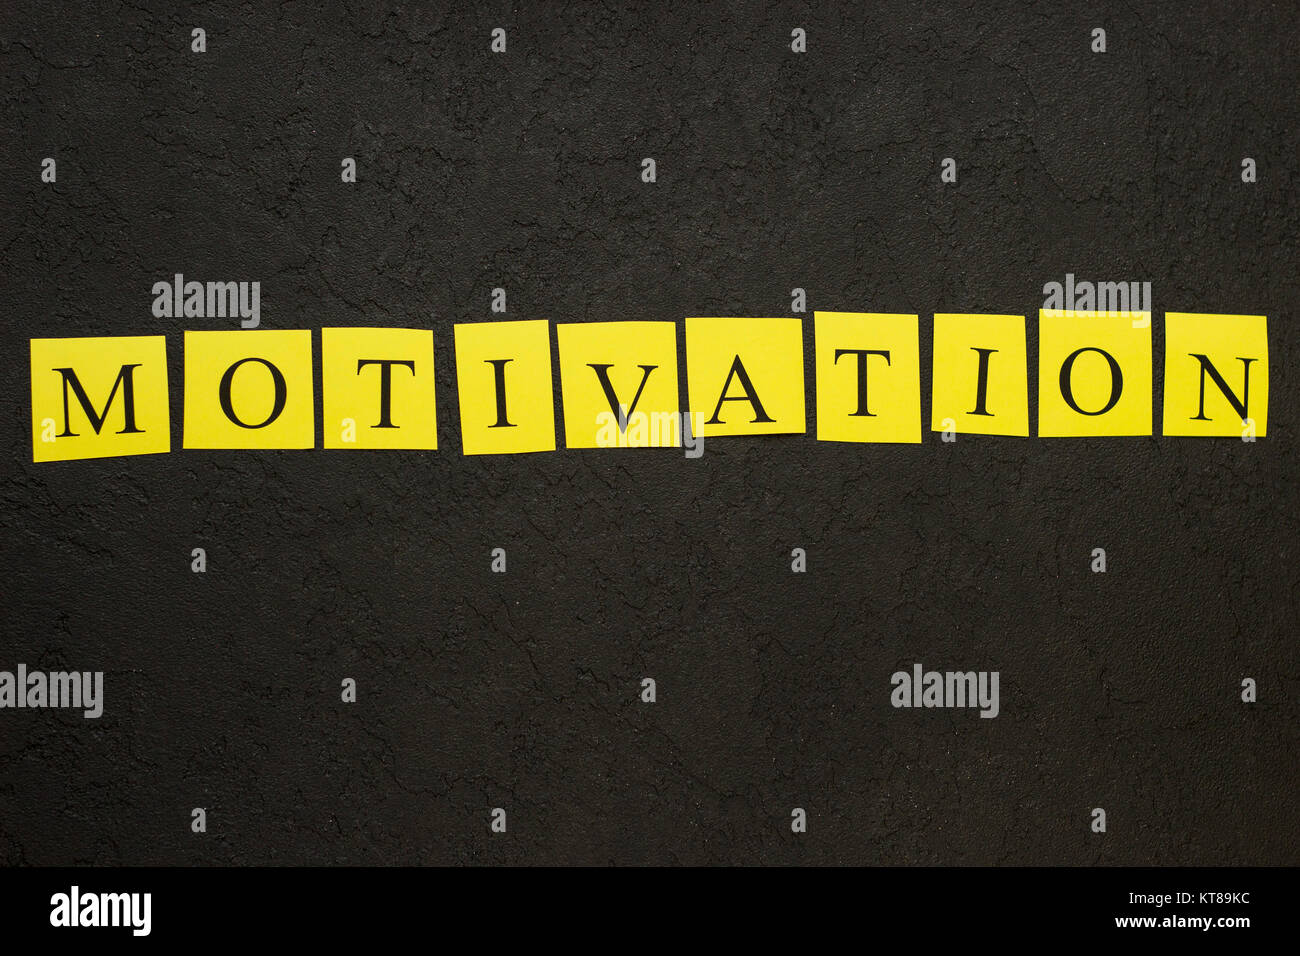 Motivation horizontal inscription of letters printed on yellow papers. Black concrete background. Space for your text or product display. Top view. Stock Photo